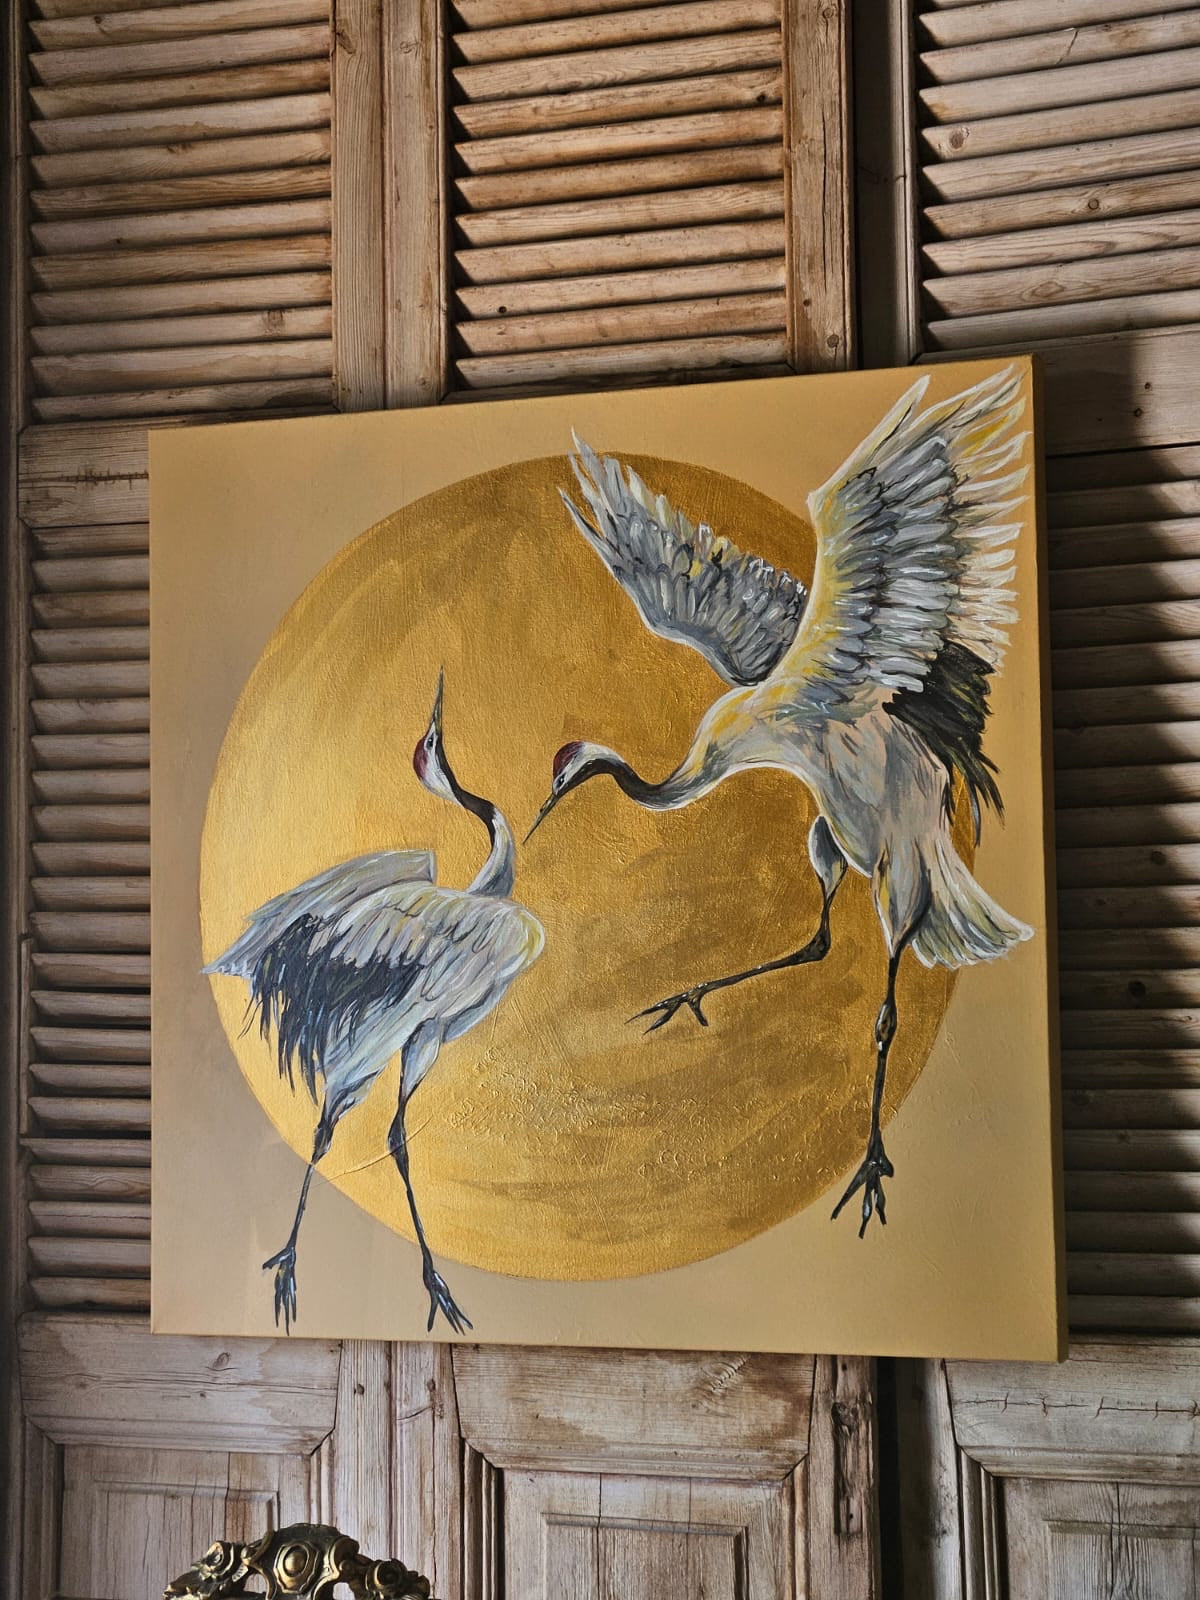 The Dance of the Cranes